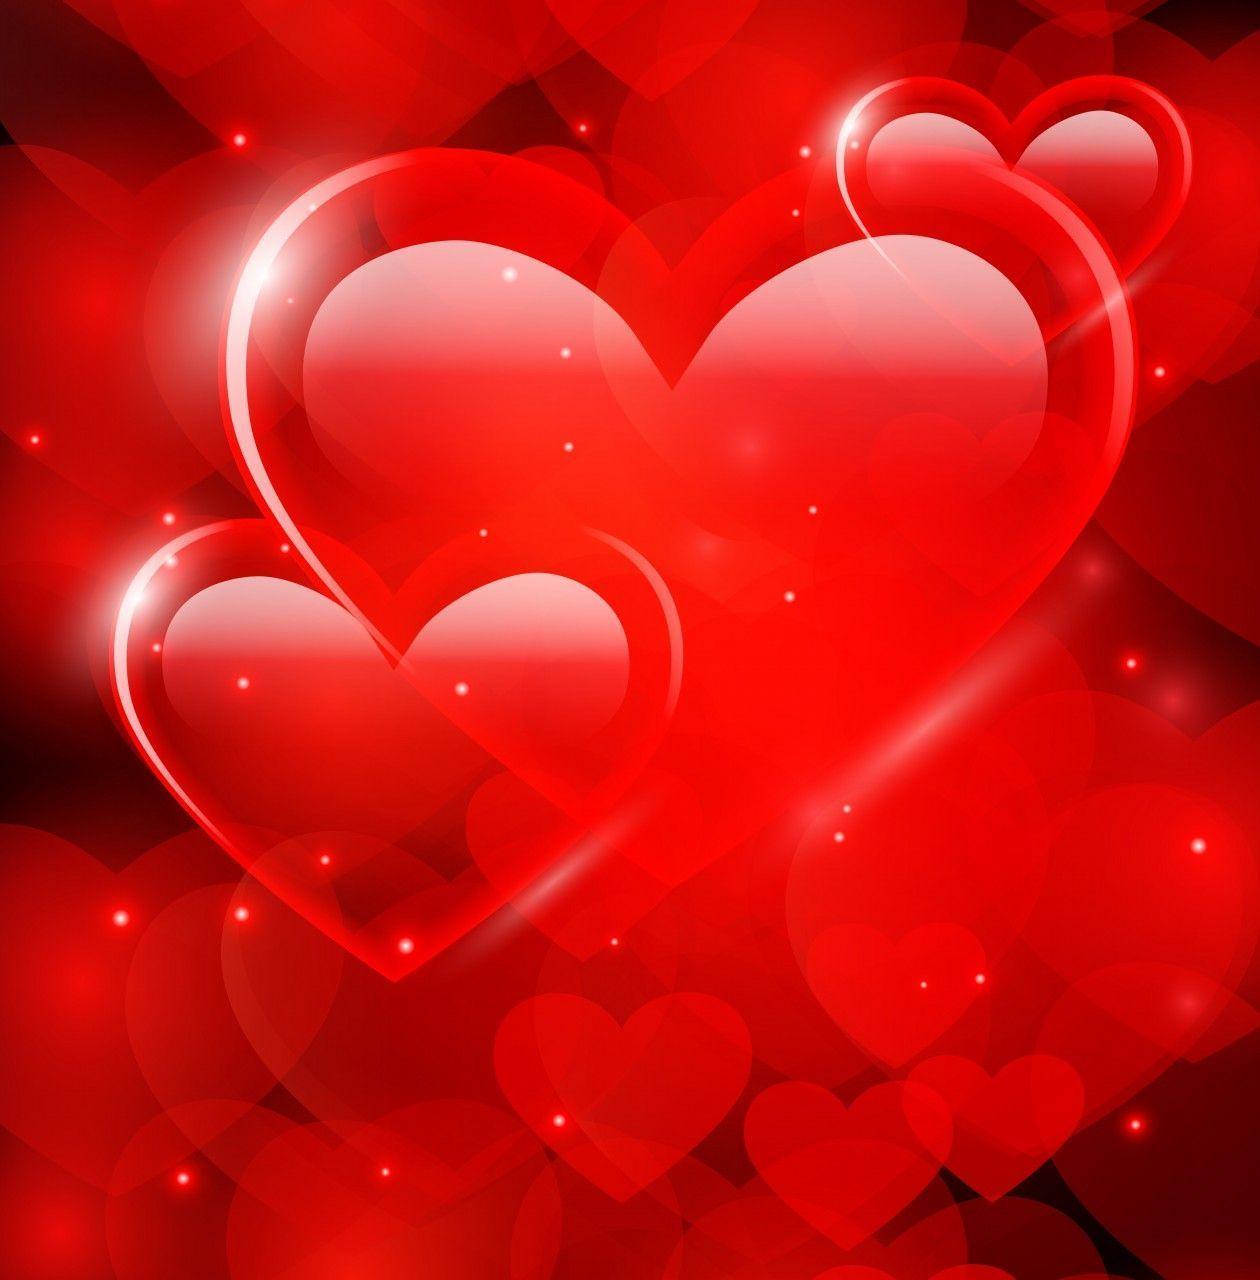 Red Heart Background